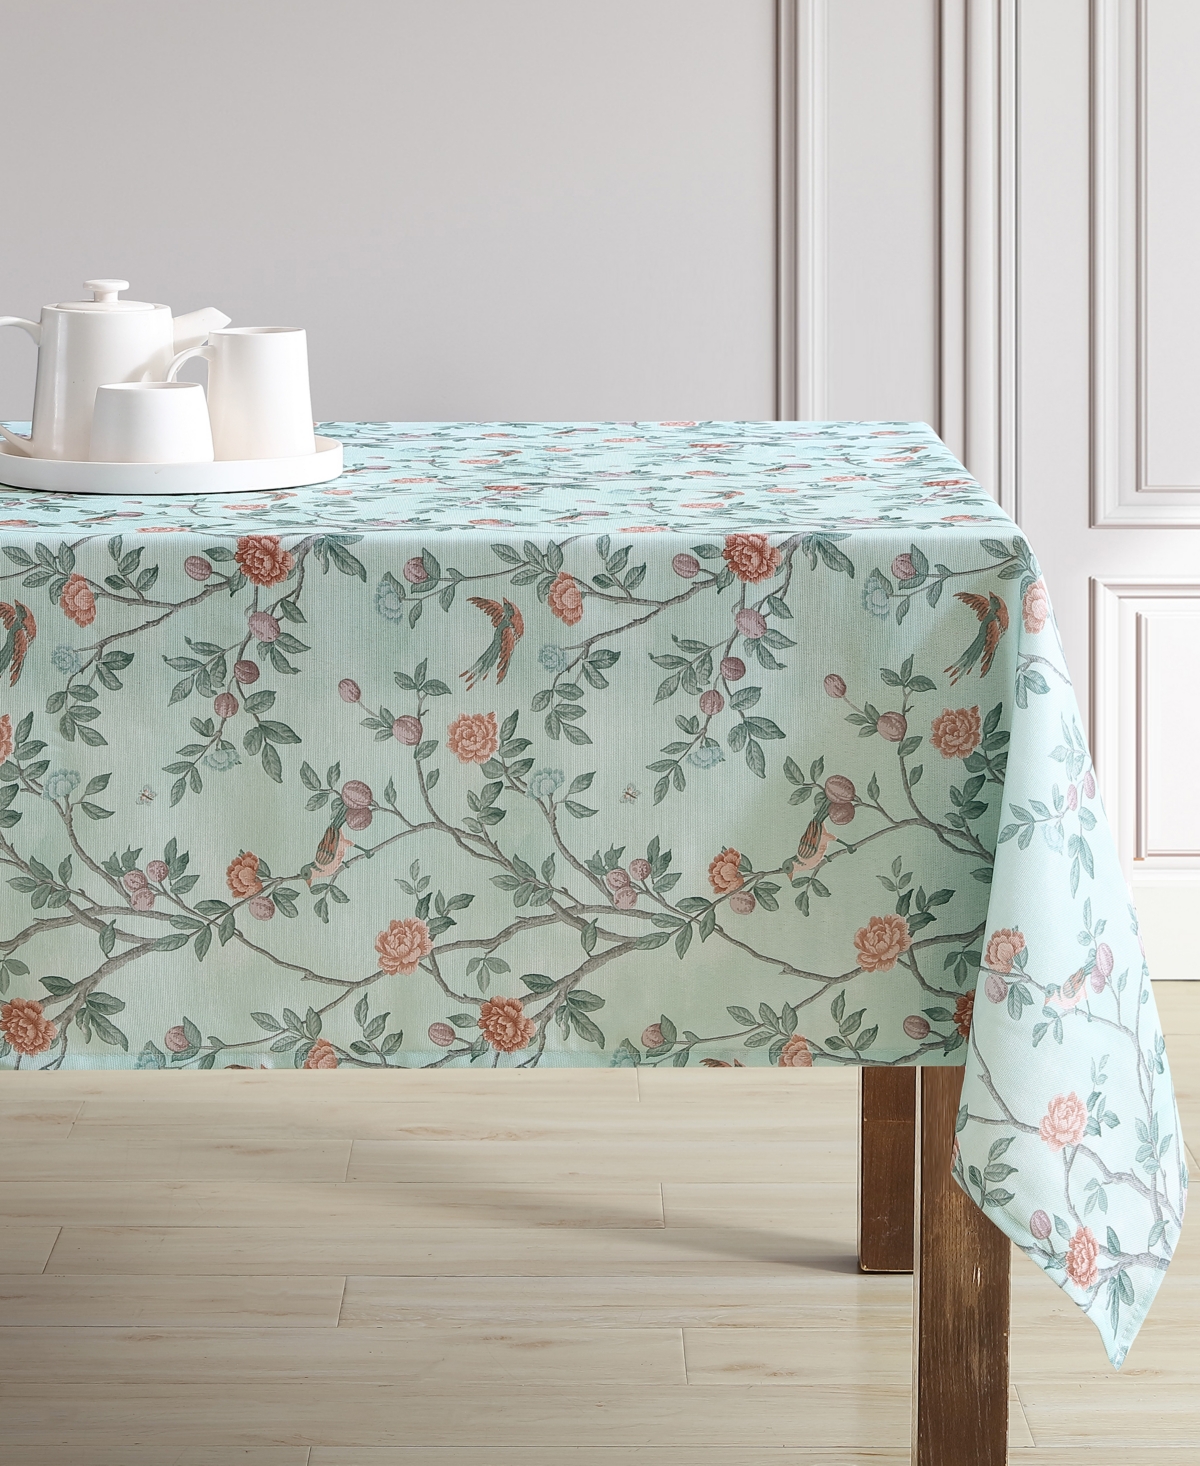 Laura Ashley Easy Care Tablecloth, 60" X 102", Service For 6 In Eglantine